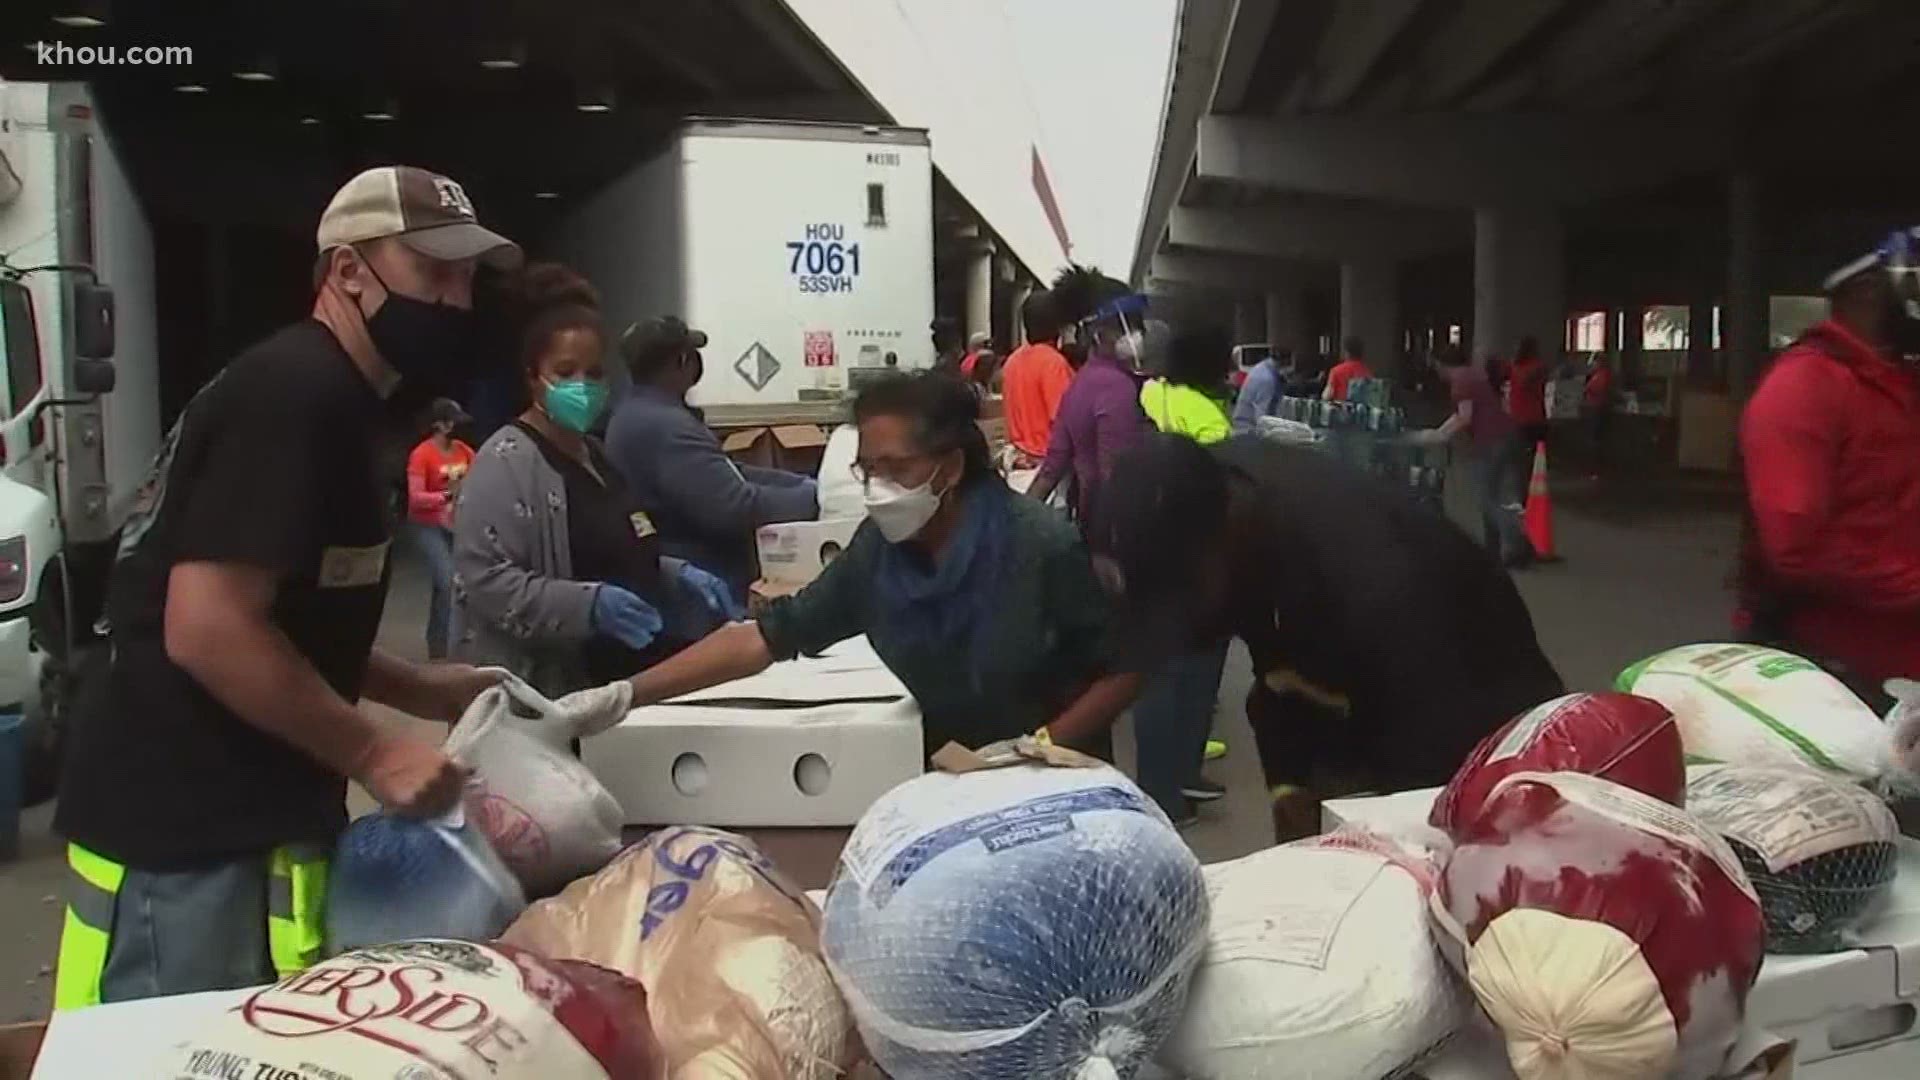 In the middle of a pandemic, Super Feast still managed to put food on thousands of plates.